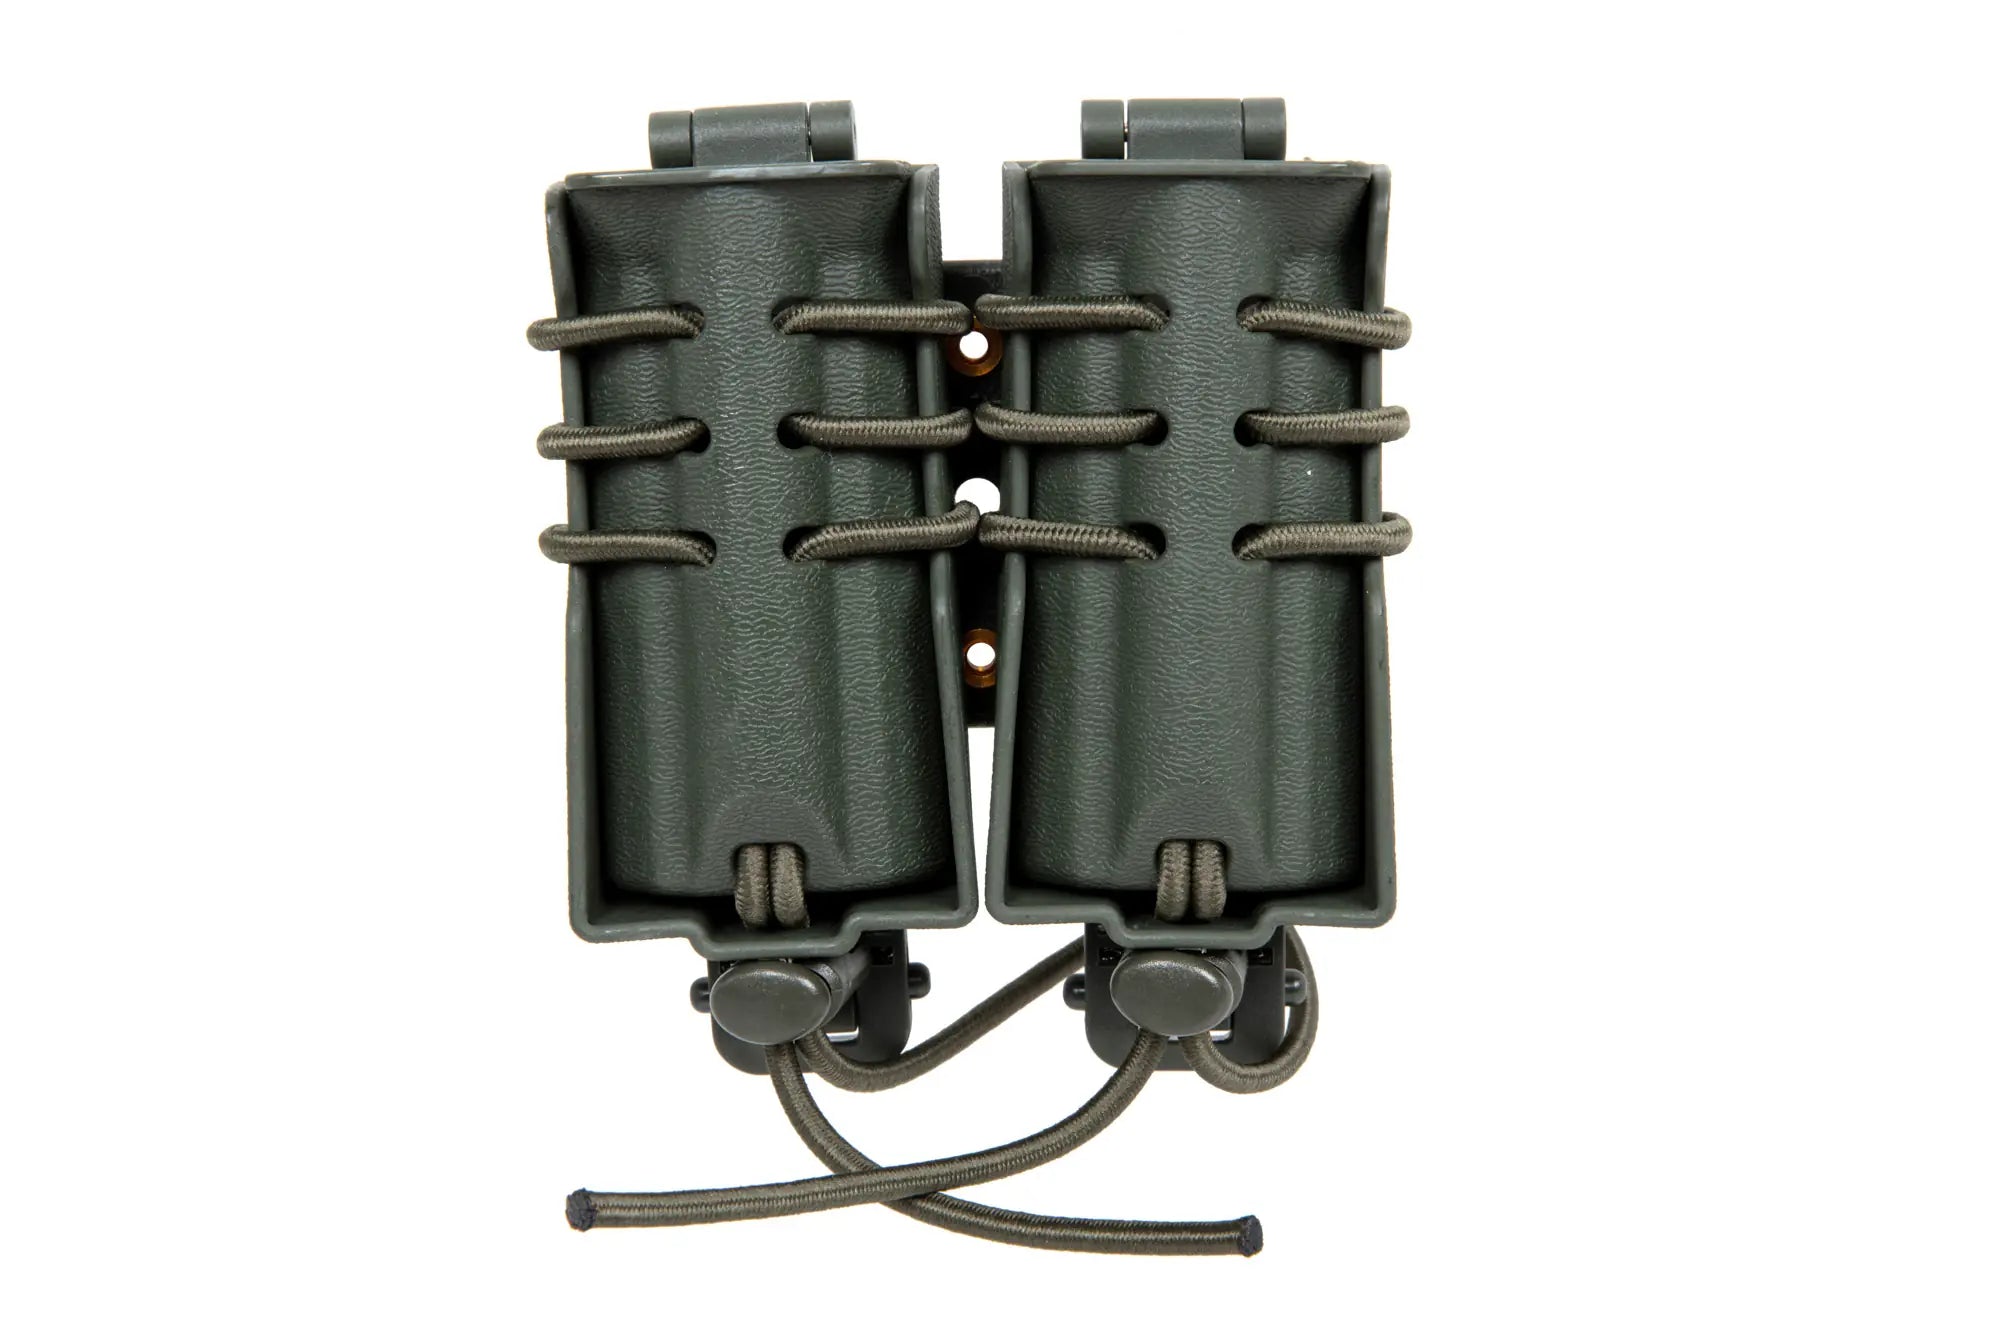 Carrier for 2 9mm magazines Wosport Urban Assault Quick Pull Olive-2